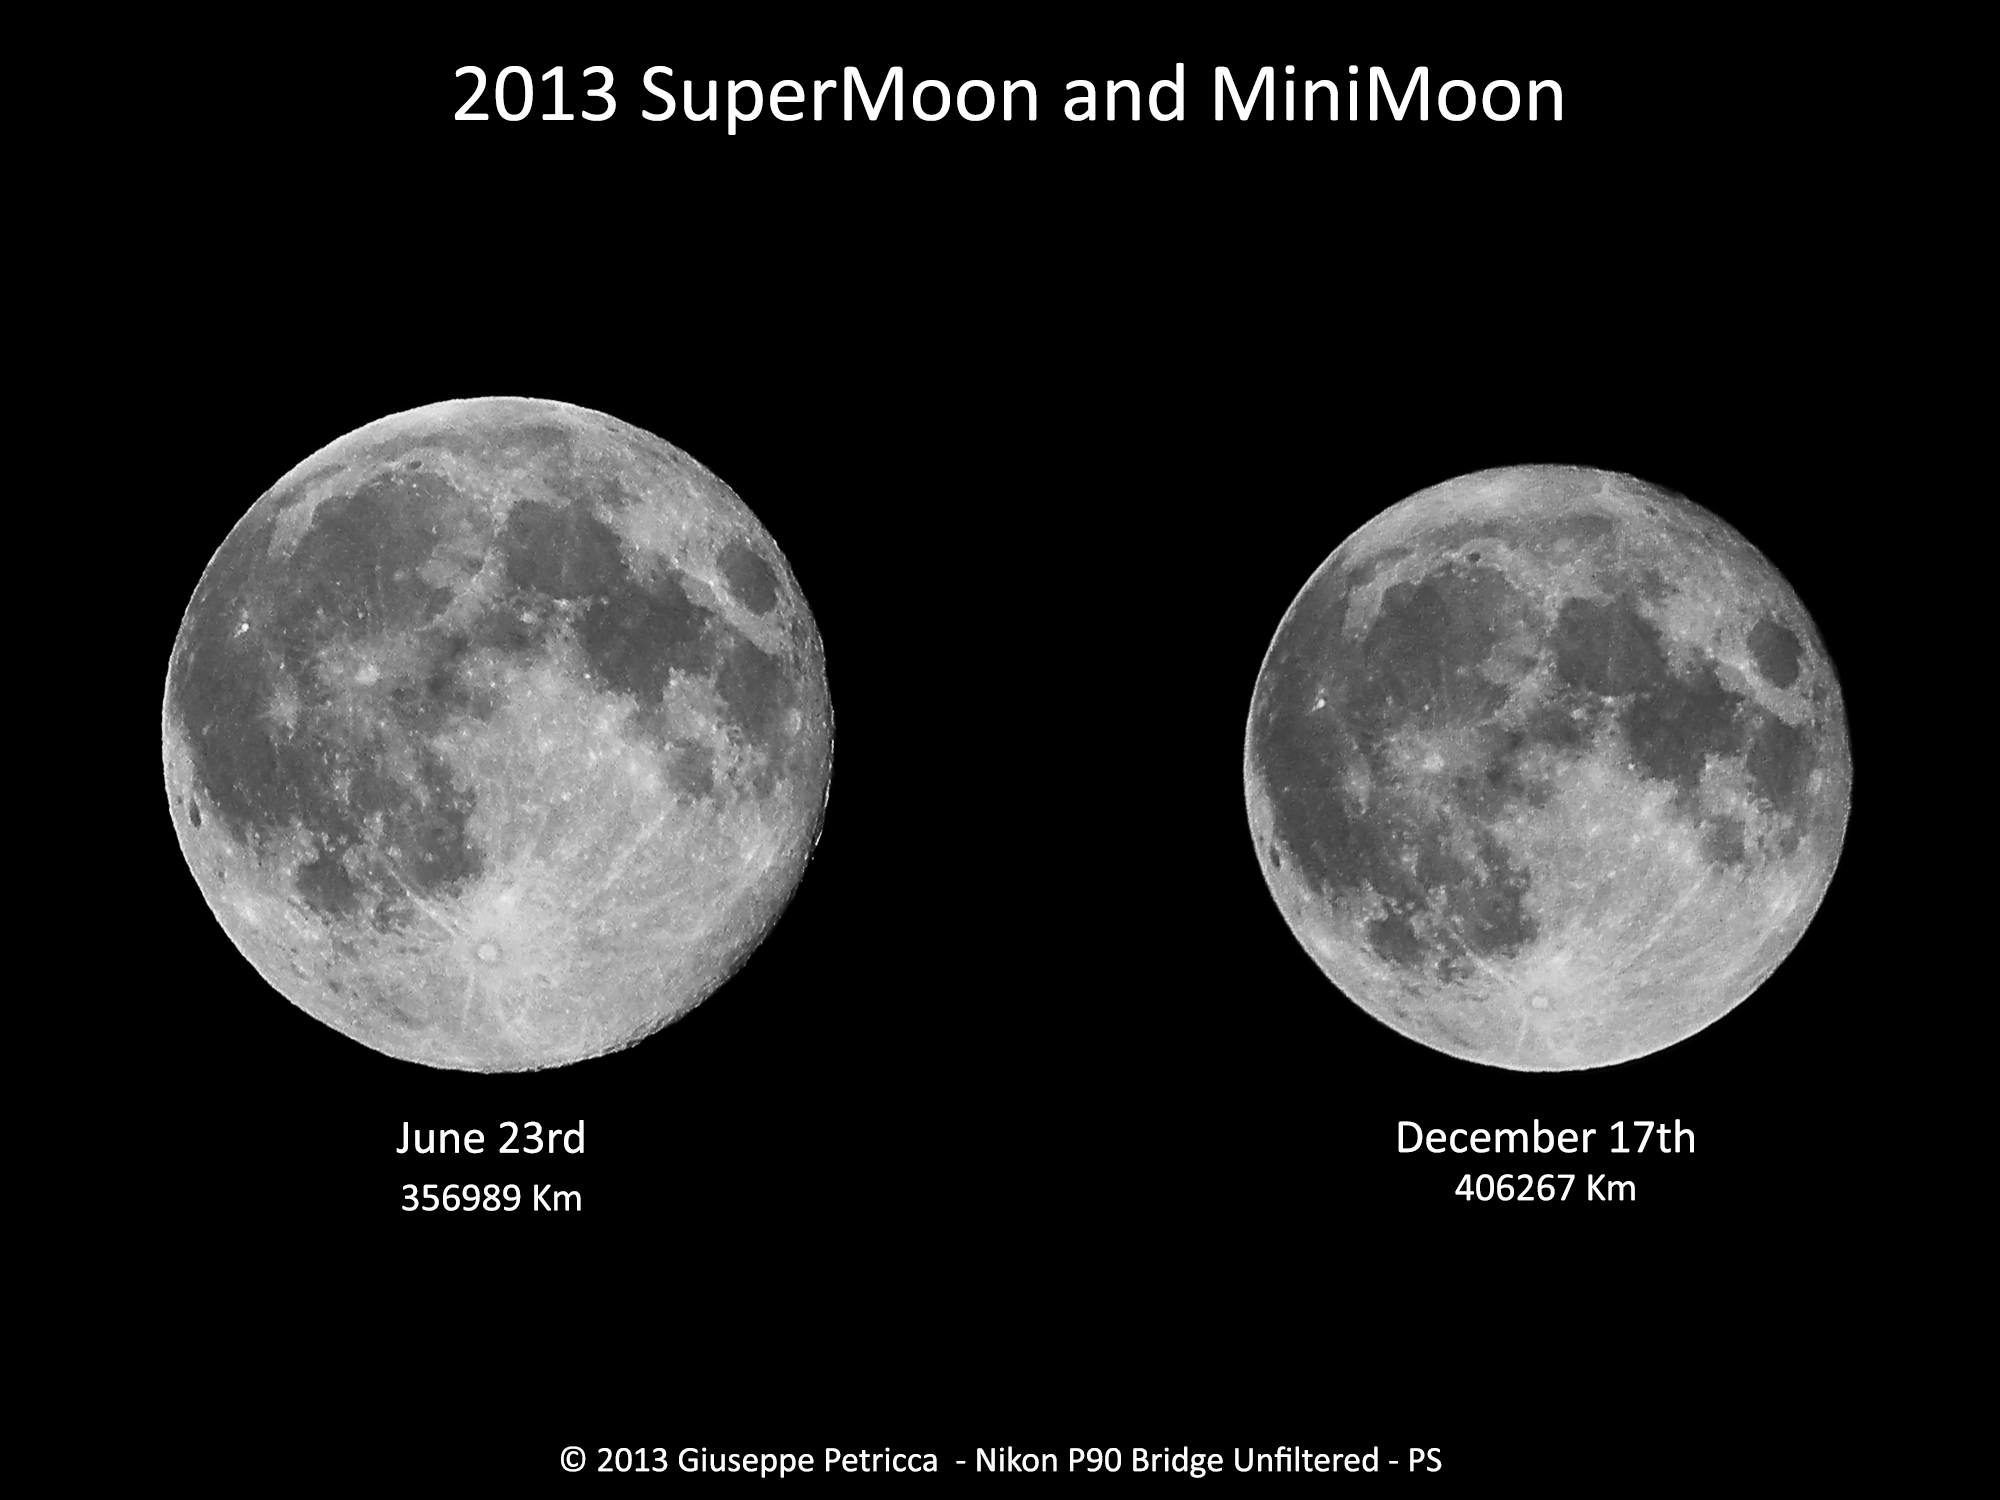 hellip; Continue reading "The 2013 Super and Mini Moon Together in...